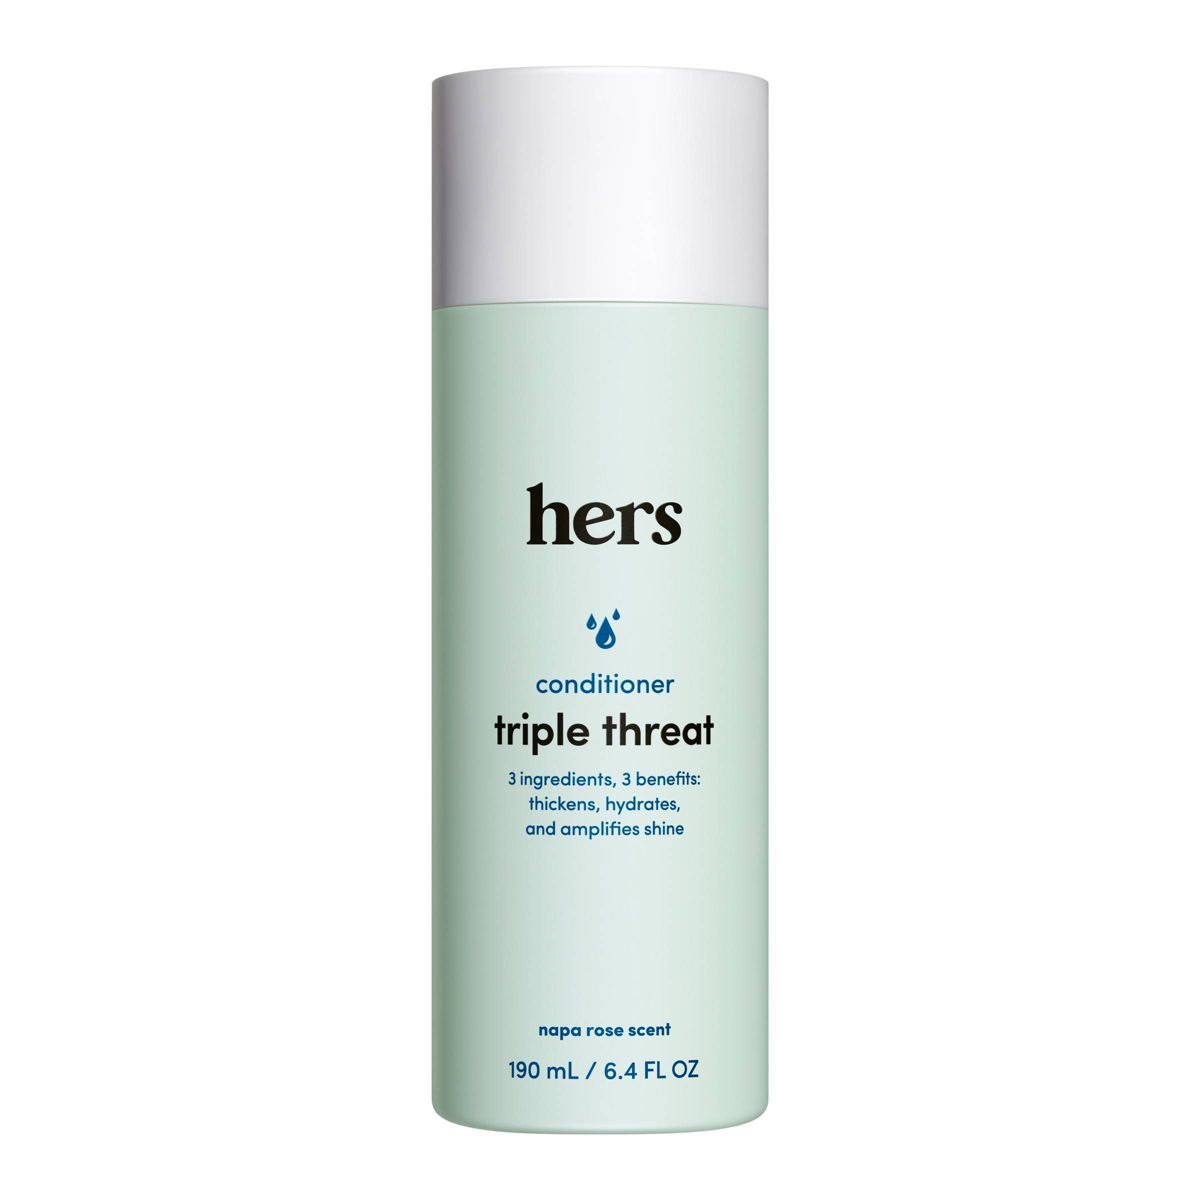 hers Triple Threat Conditioner for Thickening & Damaged Hair Repair - 6.4 fl oz | Target